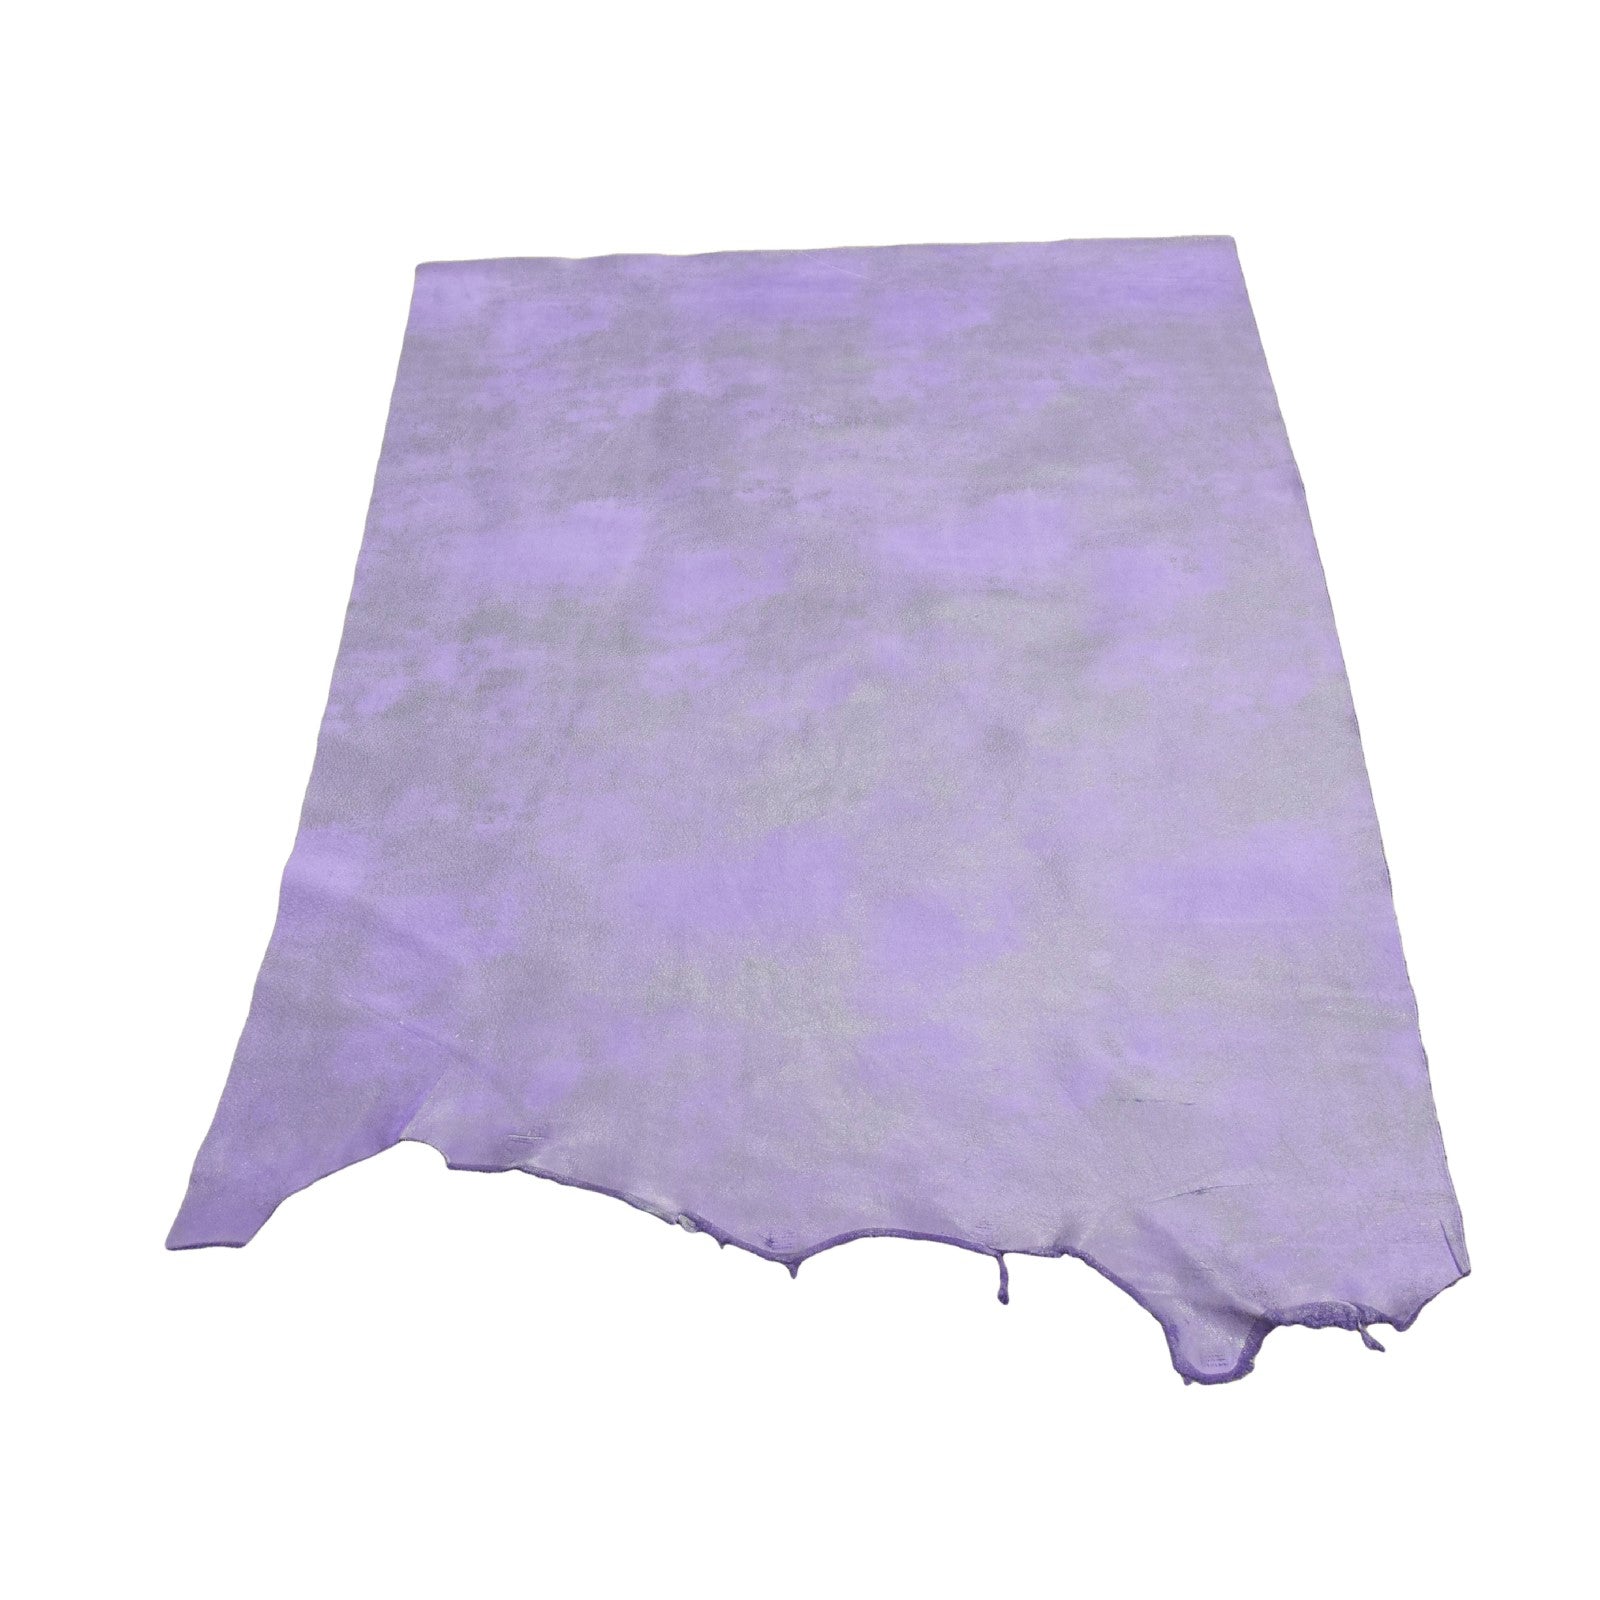 Dearly Beloved Purple Rock N Roll 2-3 oz Leather Cow Hides, Middle Piece / 6.5-7.5 Square Foot | The Leather Guy